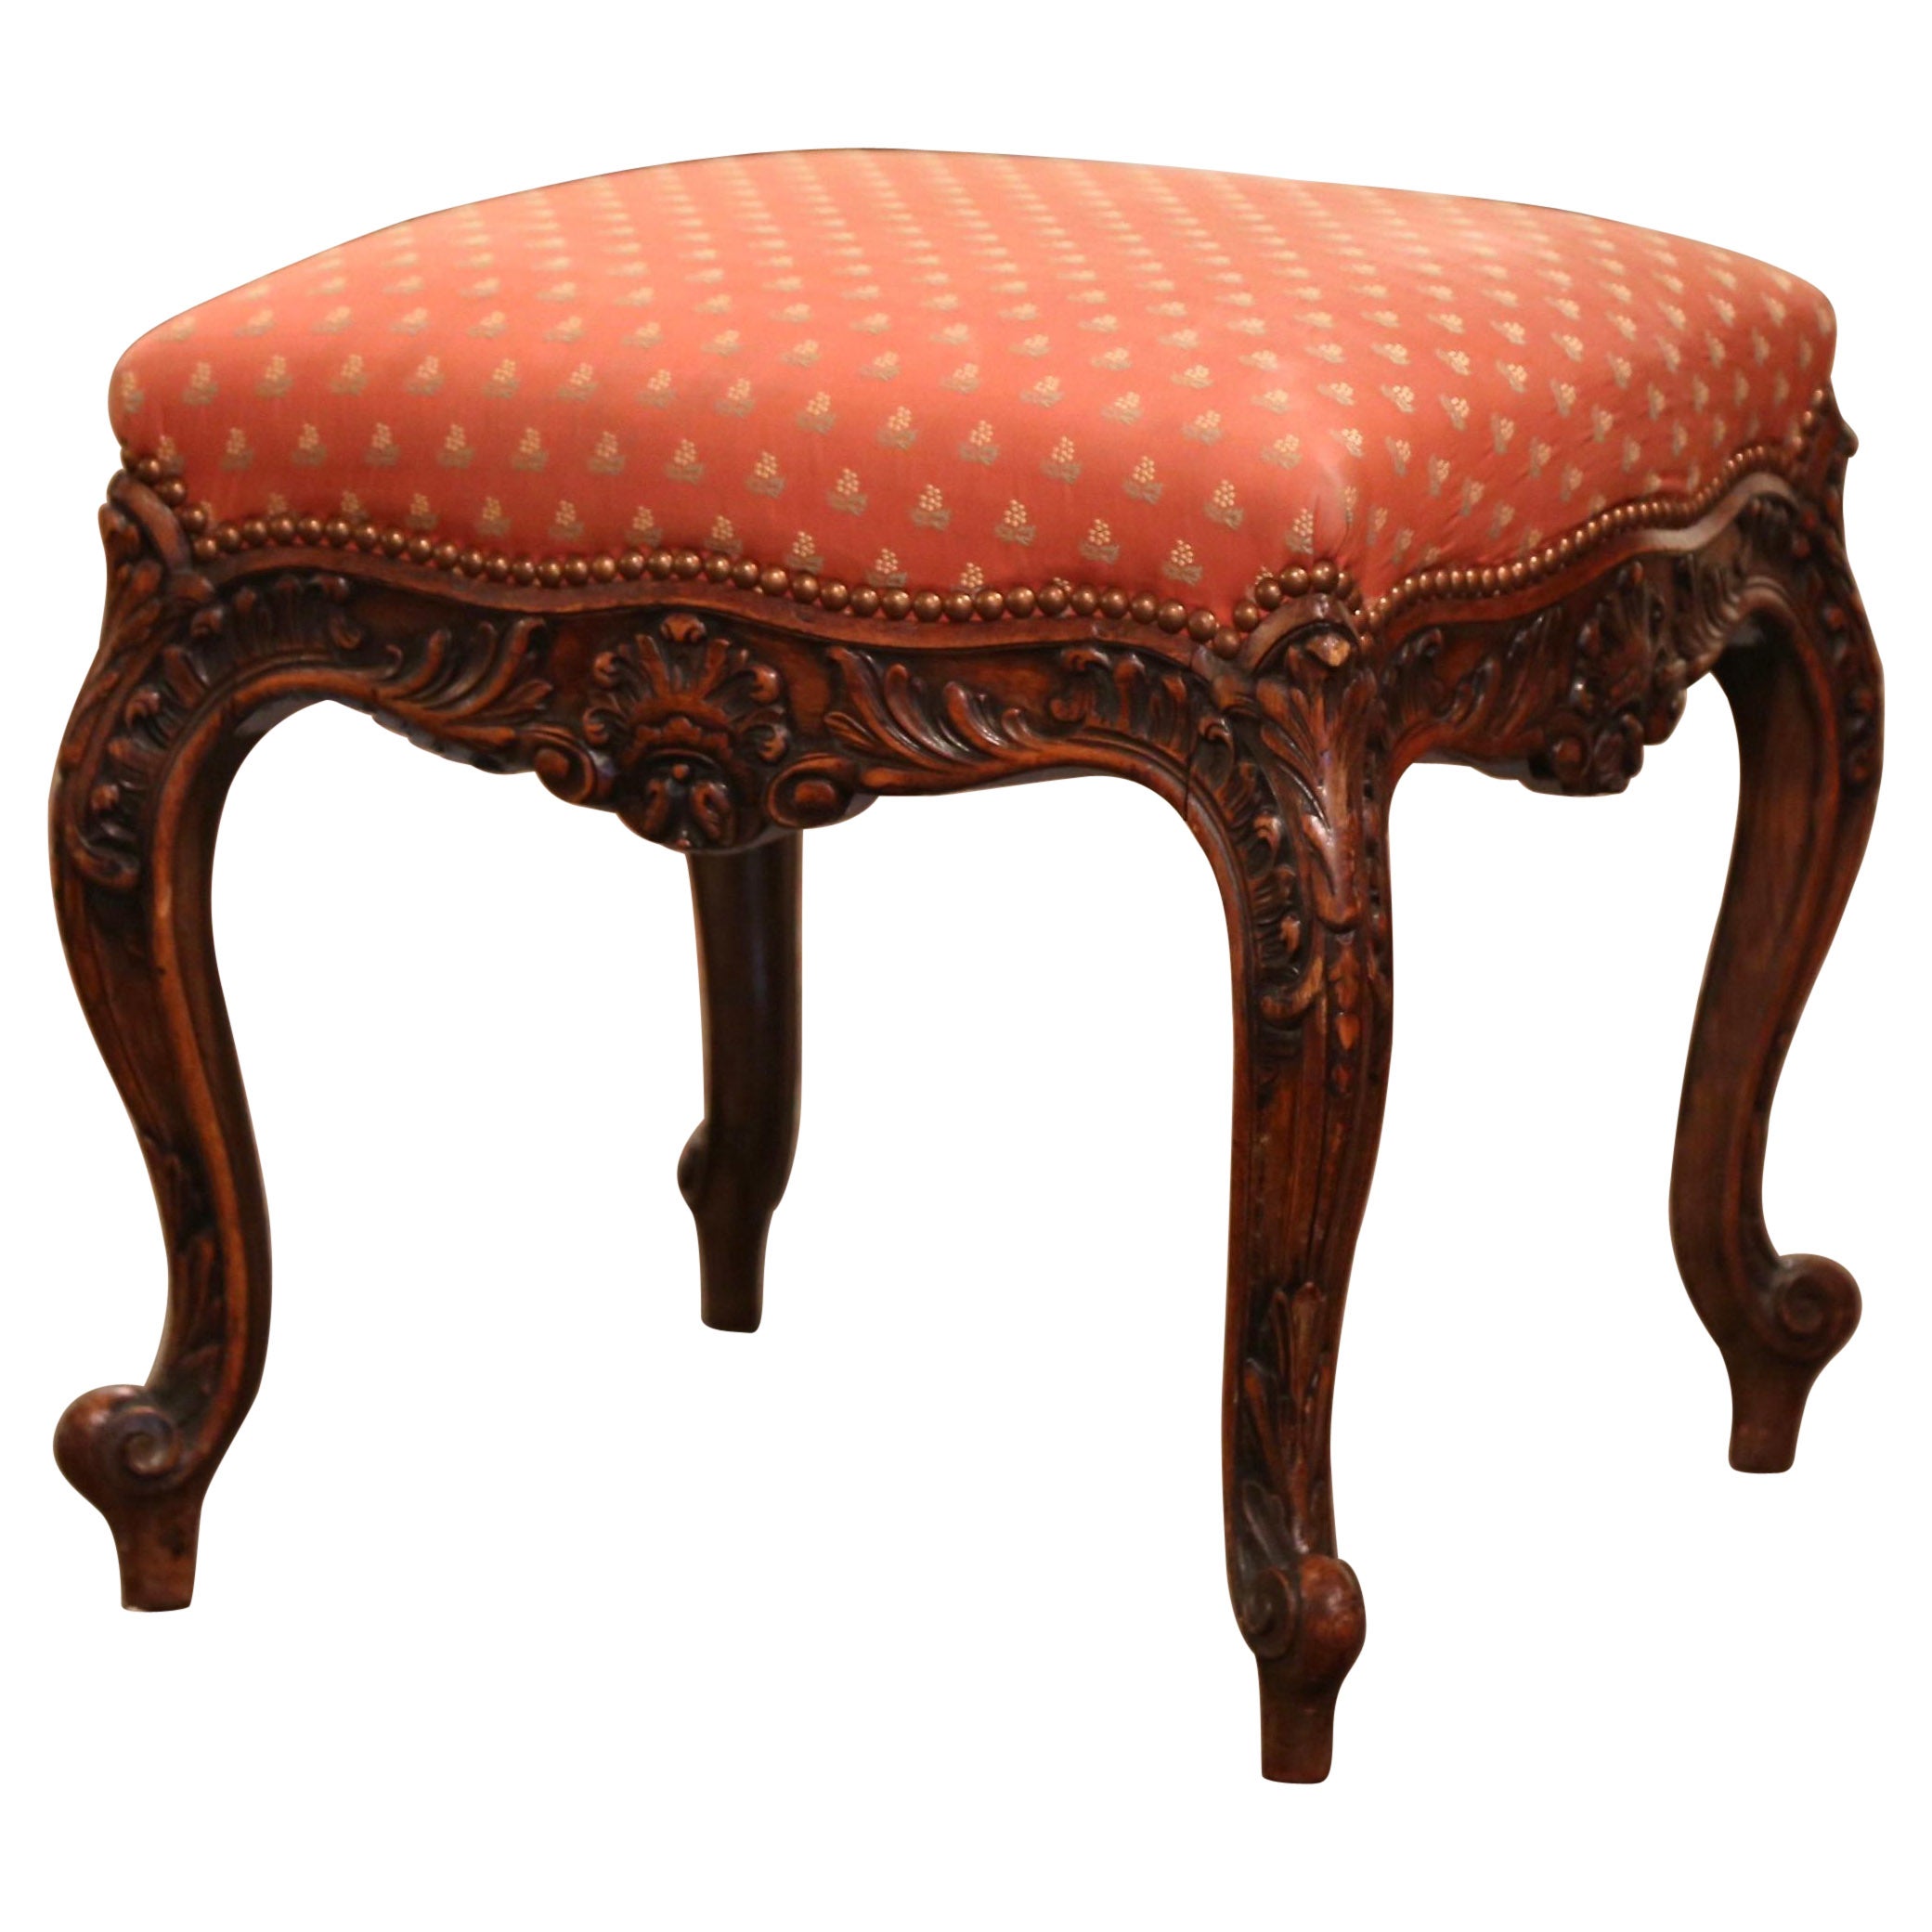 Early 20th Century French Louis XV Carved Walnut Stool from Lyon